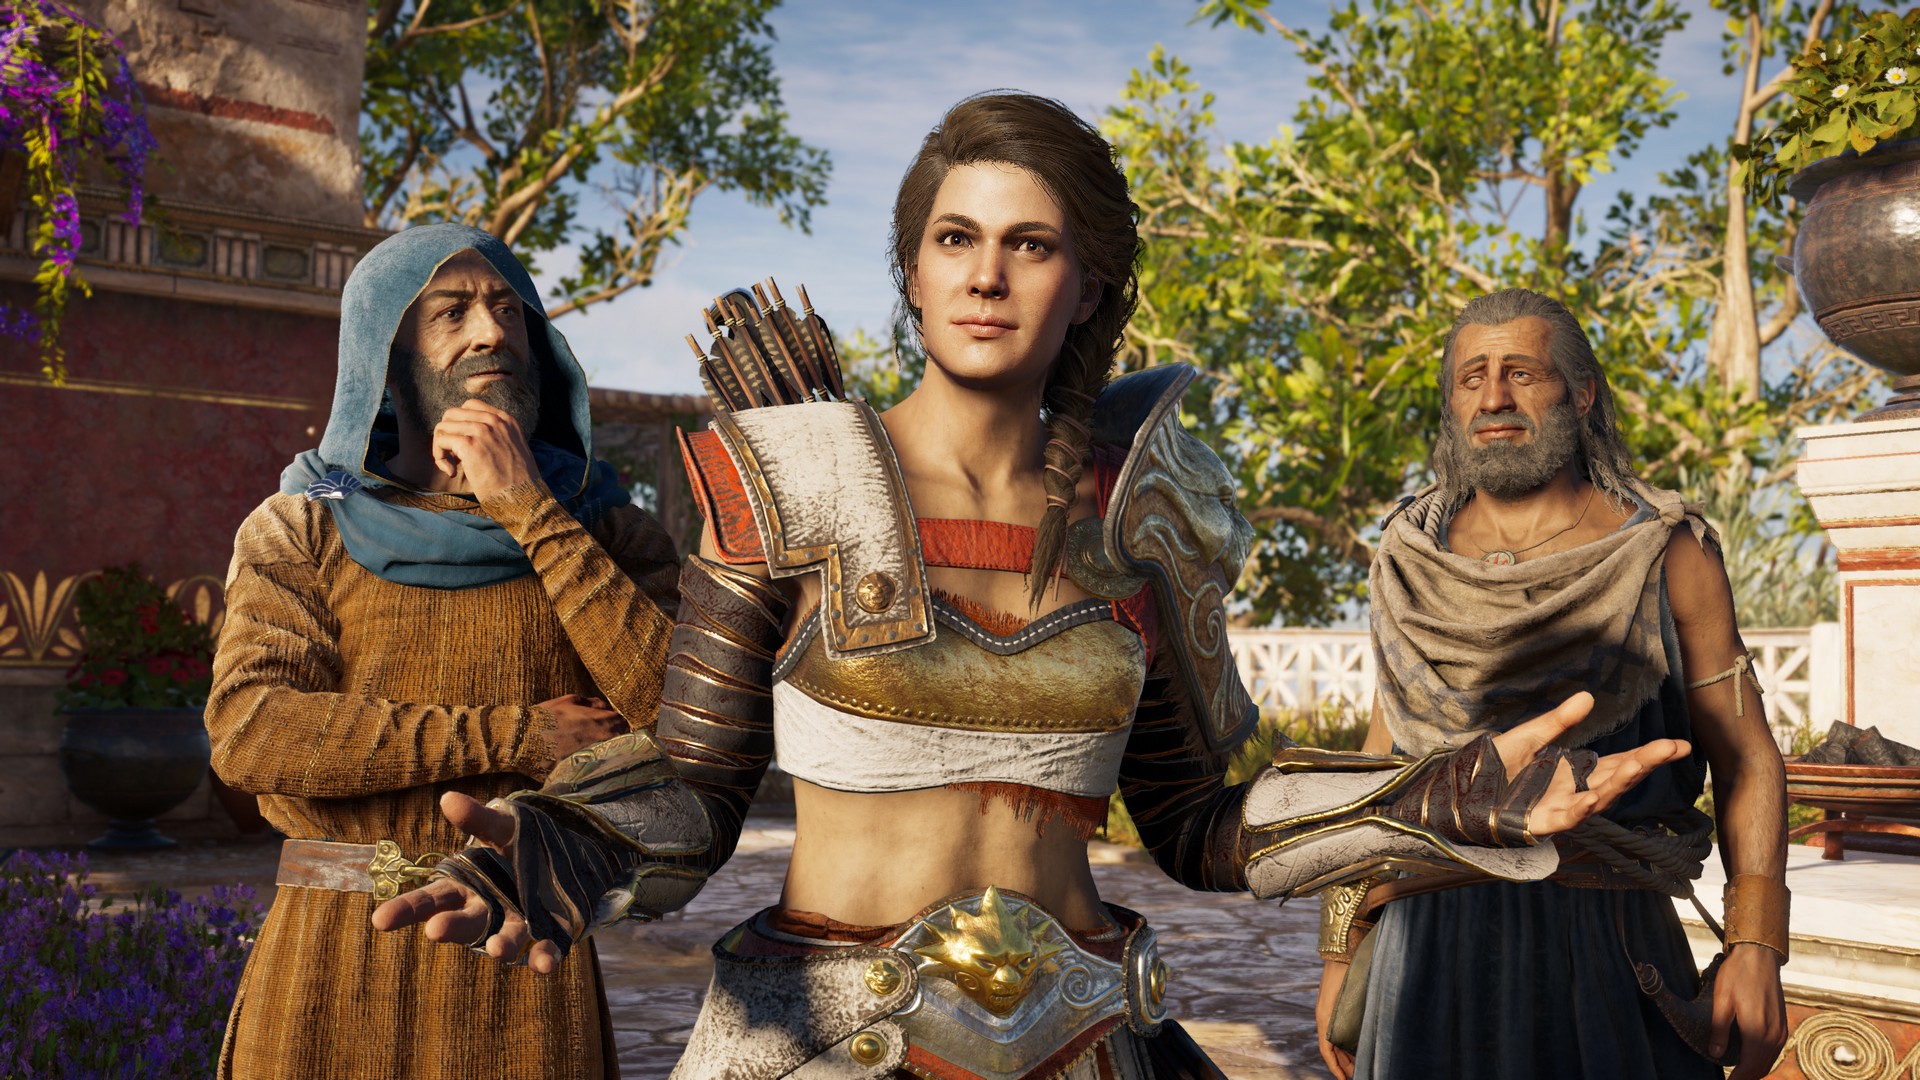 Assassin’s Creed Crossover Stories Featuring Eivor and Kassandra Available Today